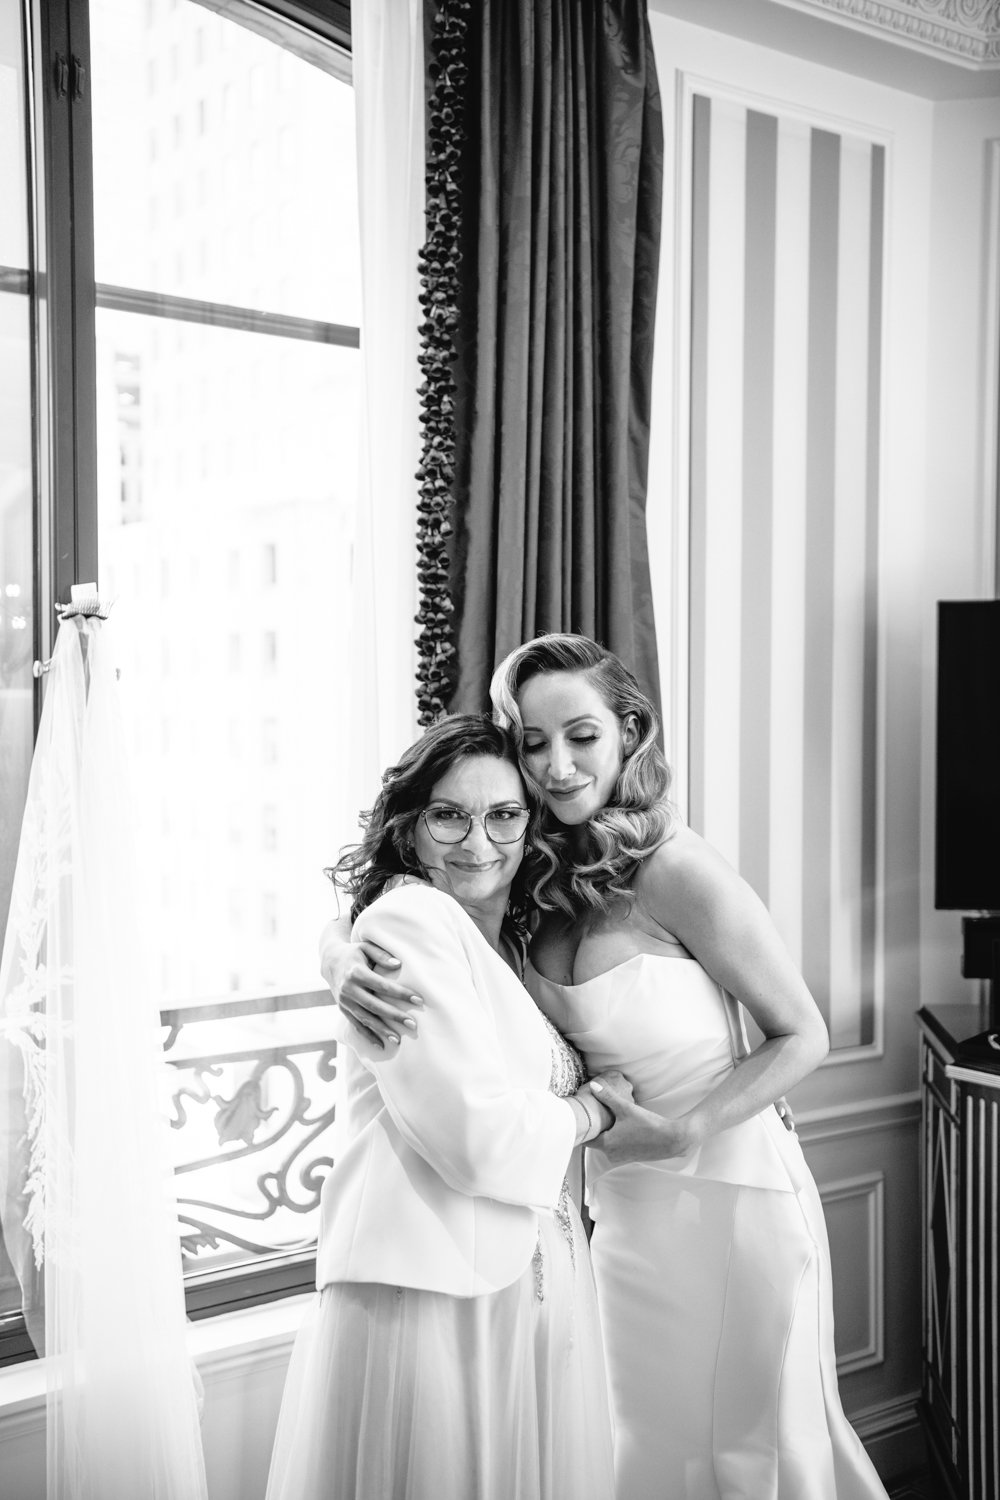 Bride is wearing her wedding gown and hugging her mother. Both are smiling. 

Manhattan Luxury Wedding. New York Luxury Wedding Photographer. Wedding in Manhattan. NYC Luxury Wedding.